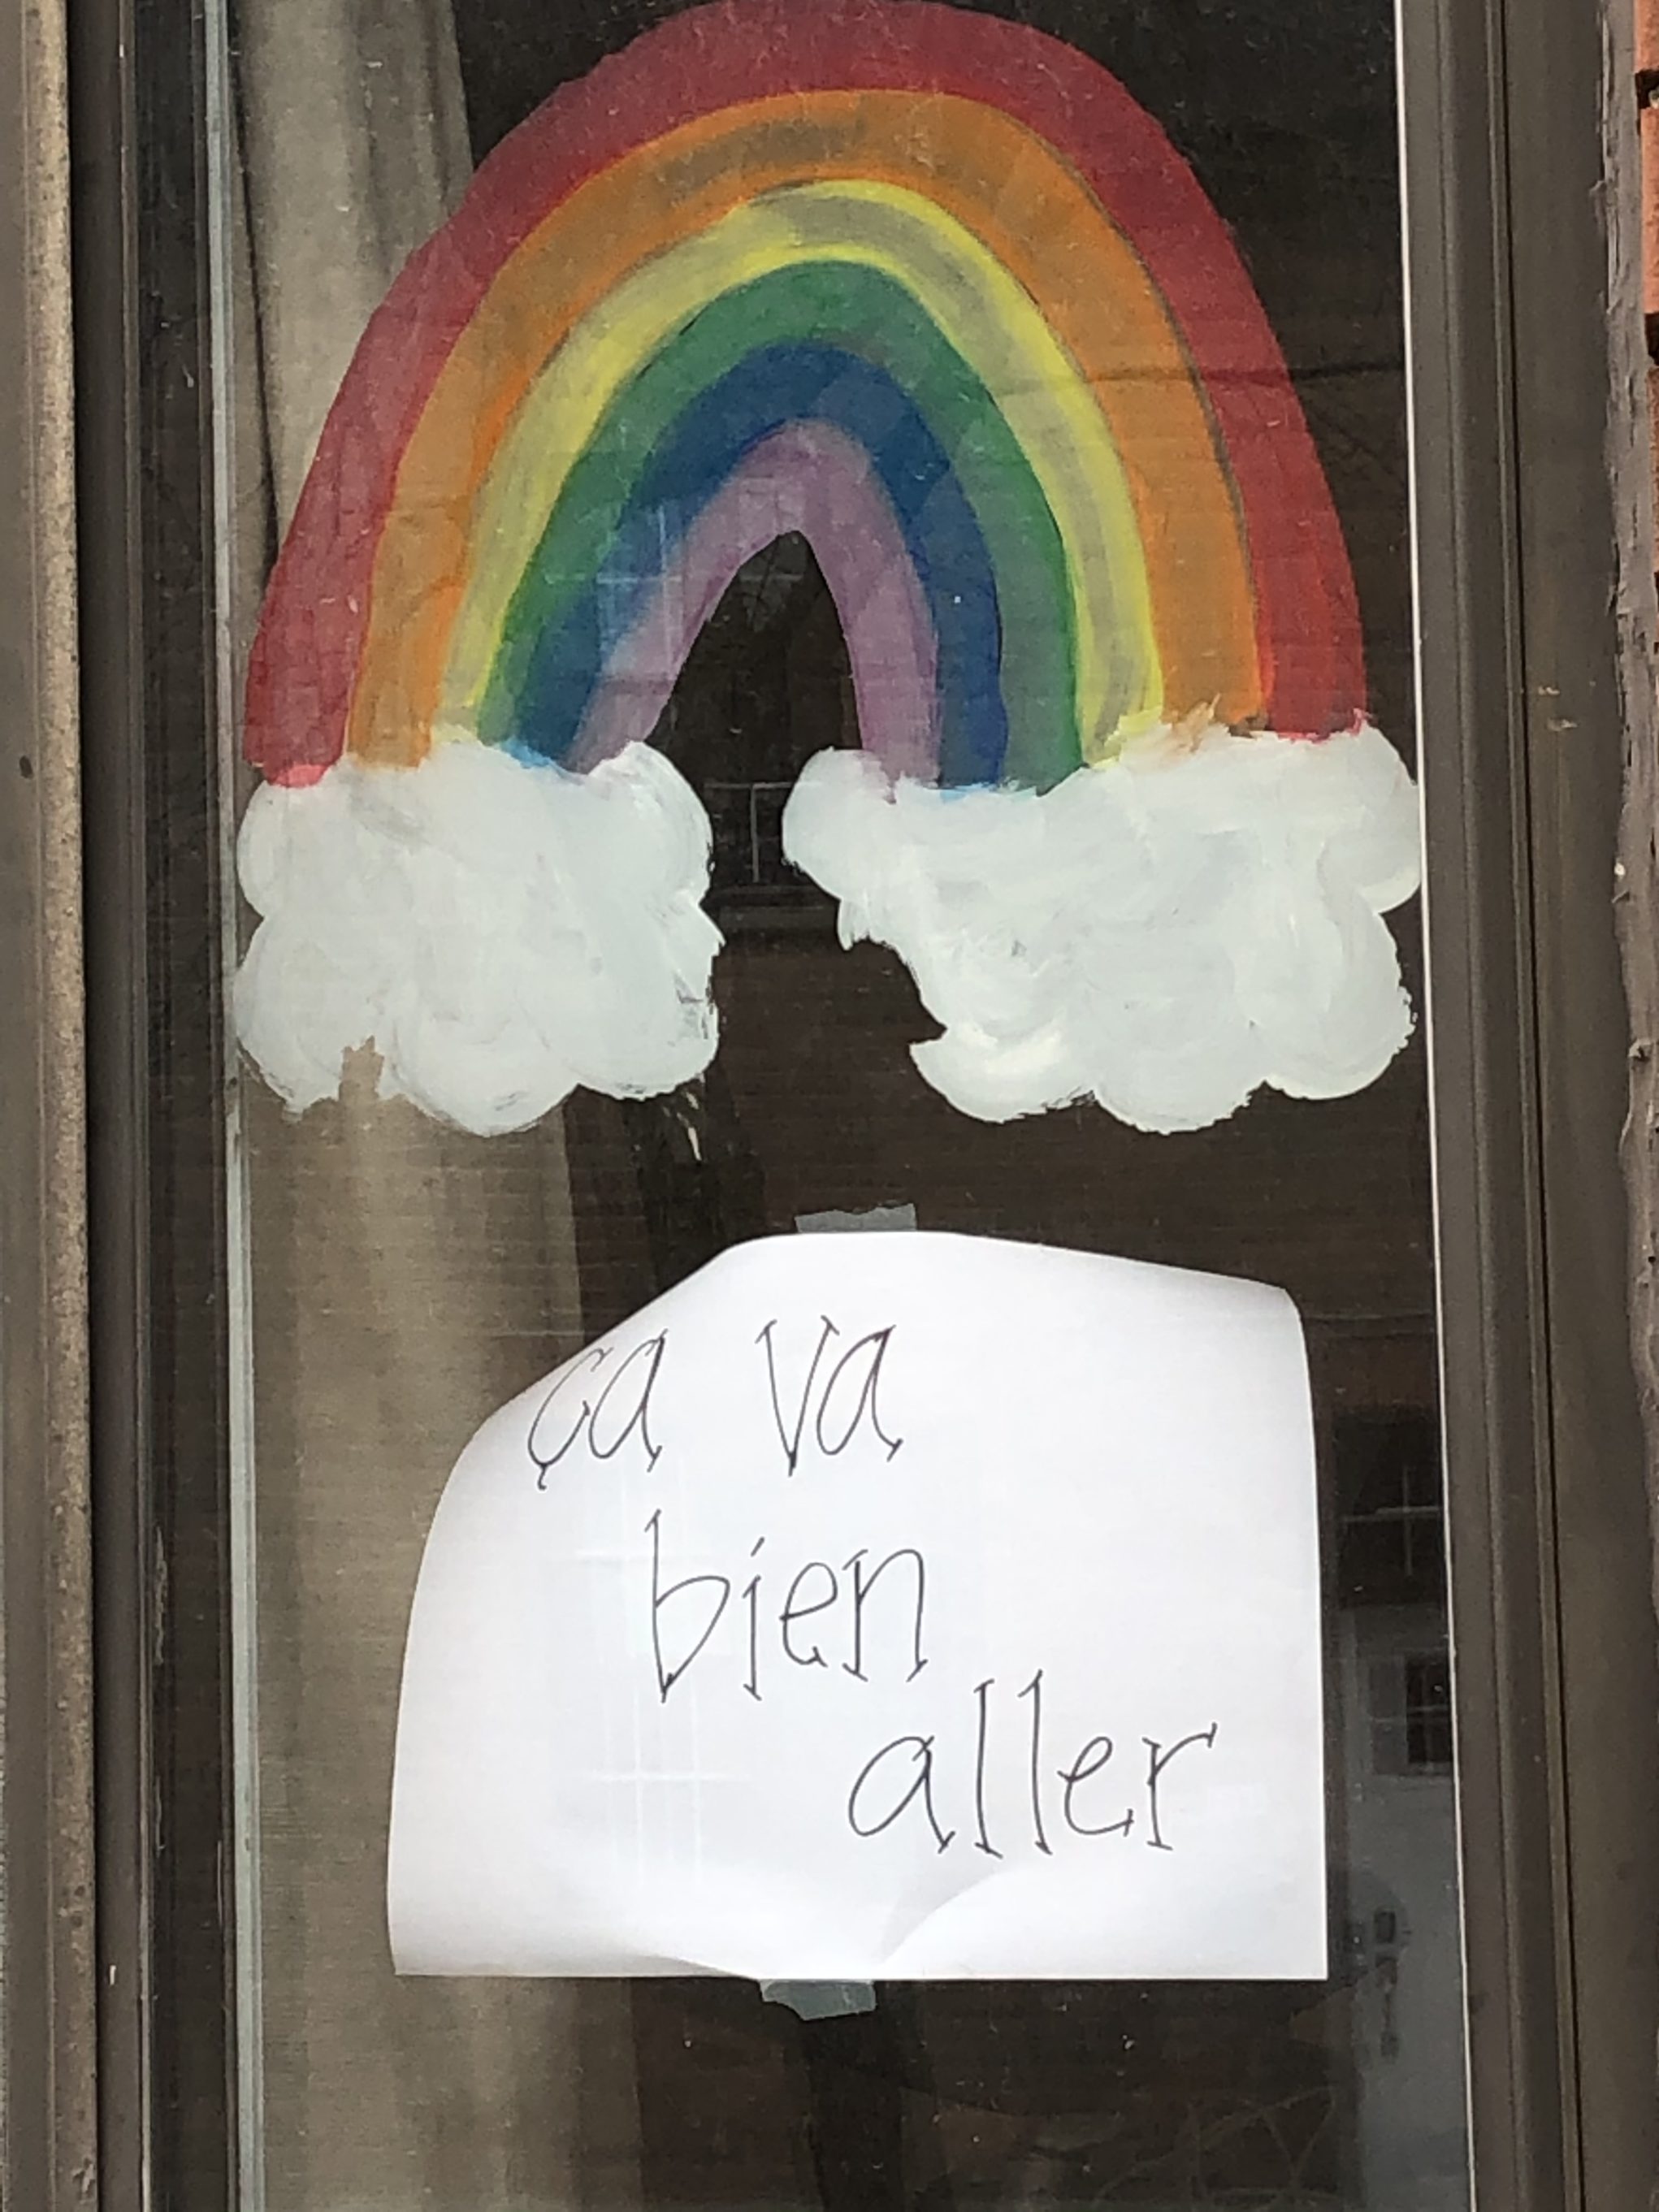 A rainbow poster in a window in Montreal.